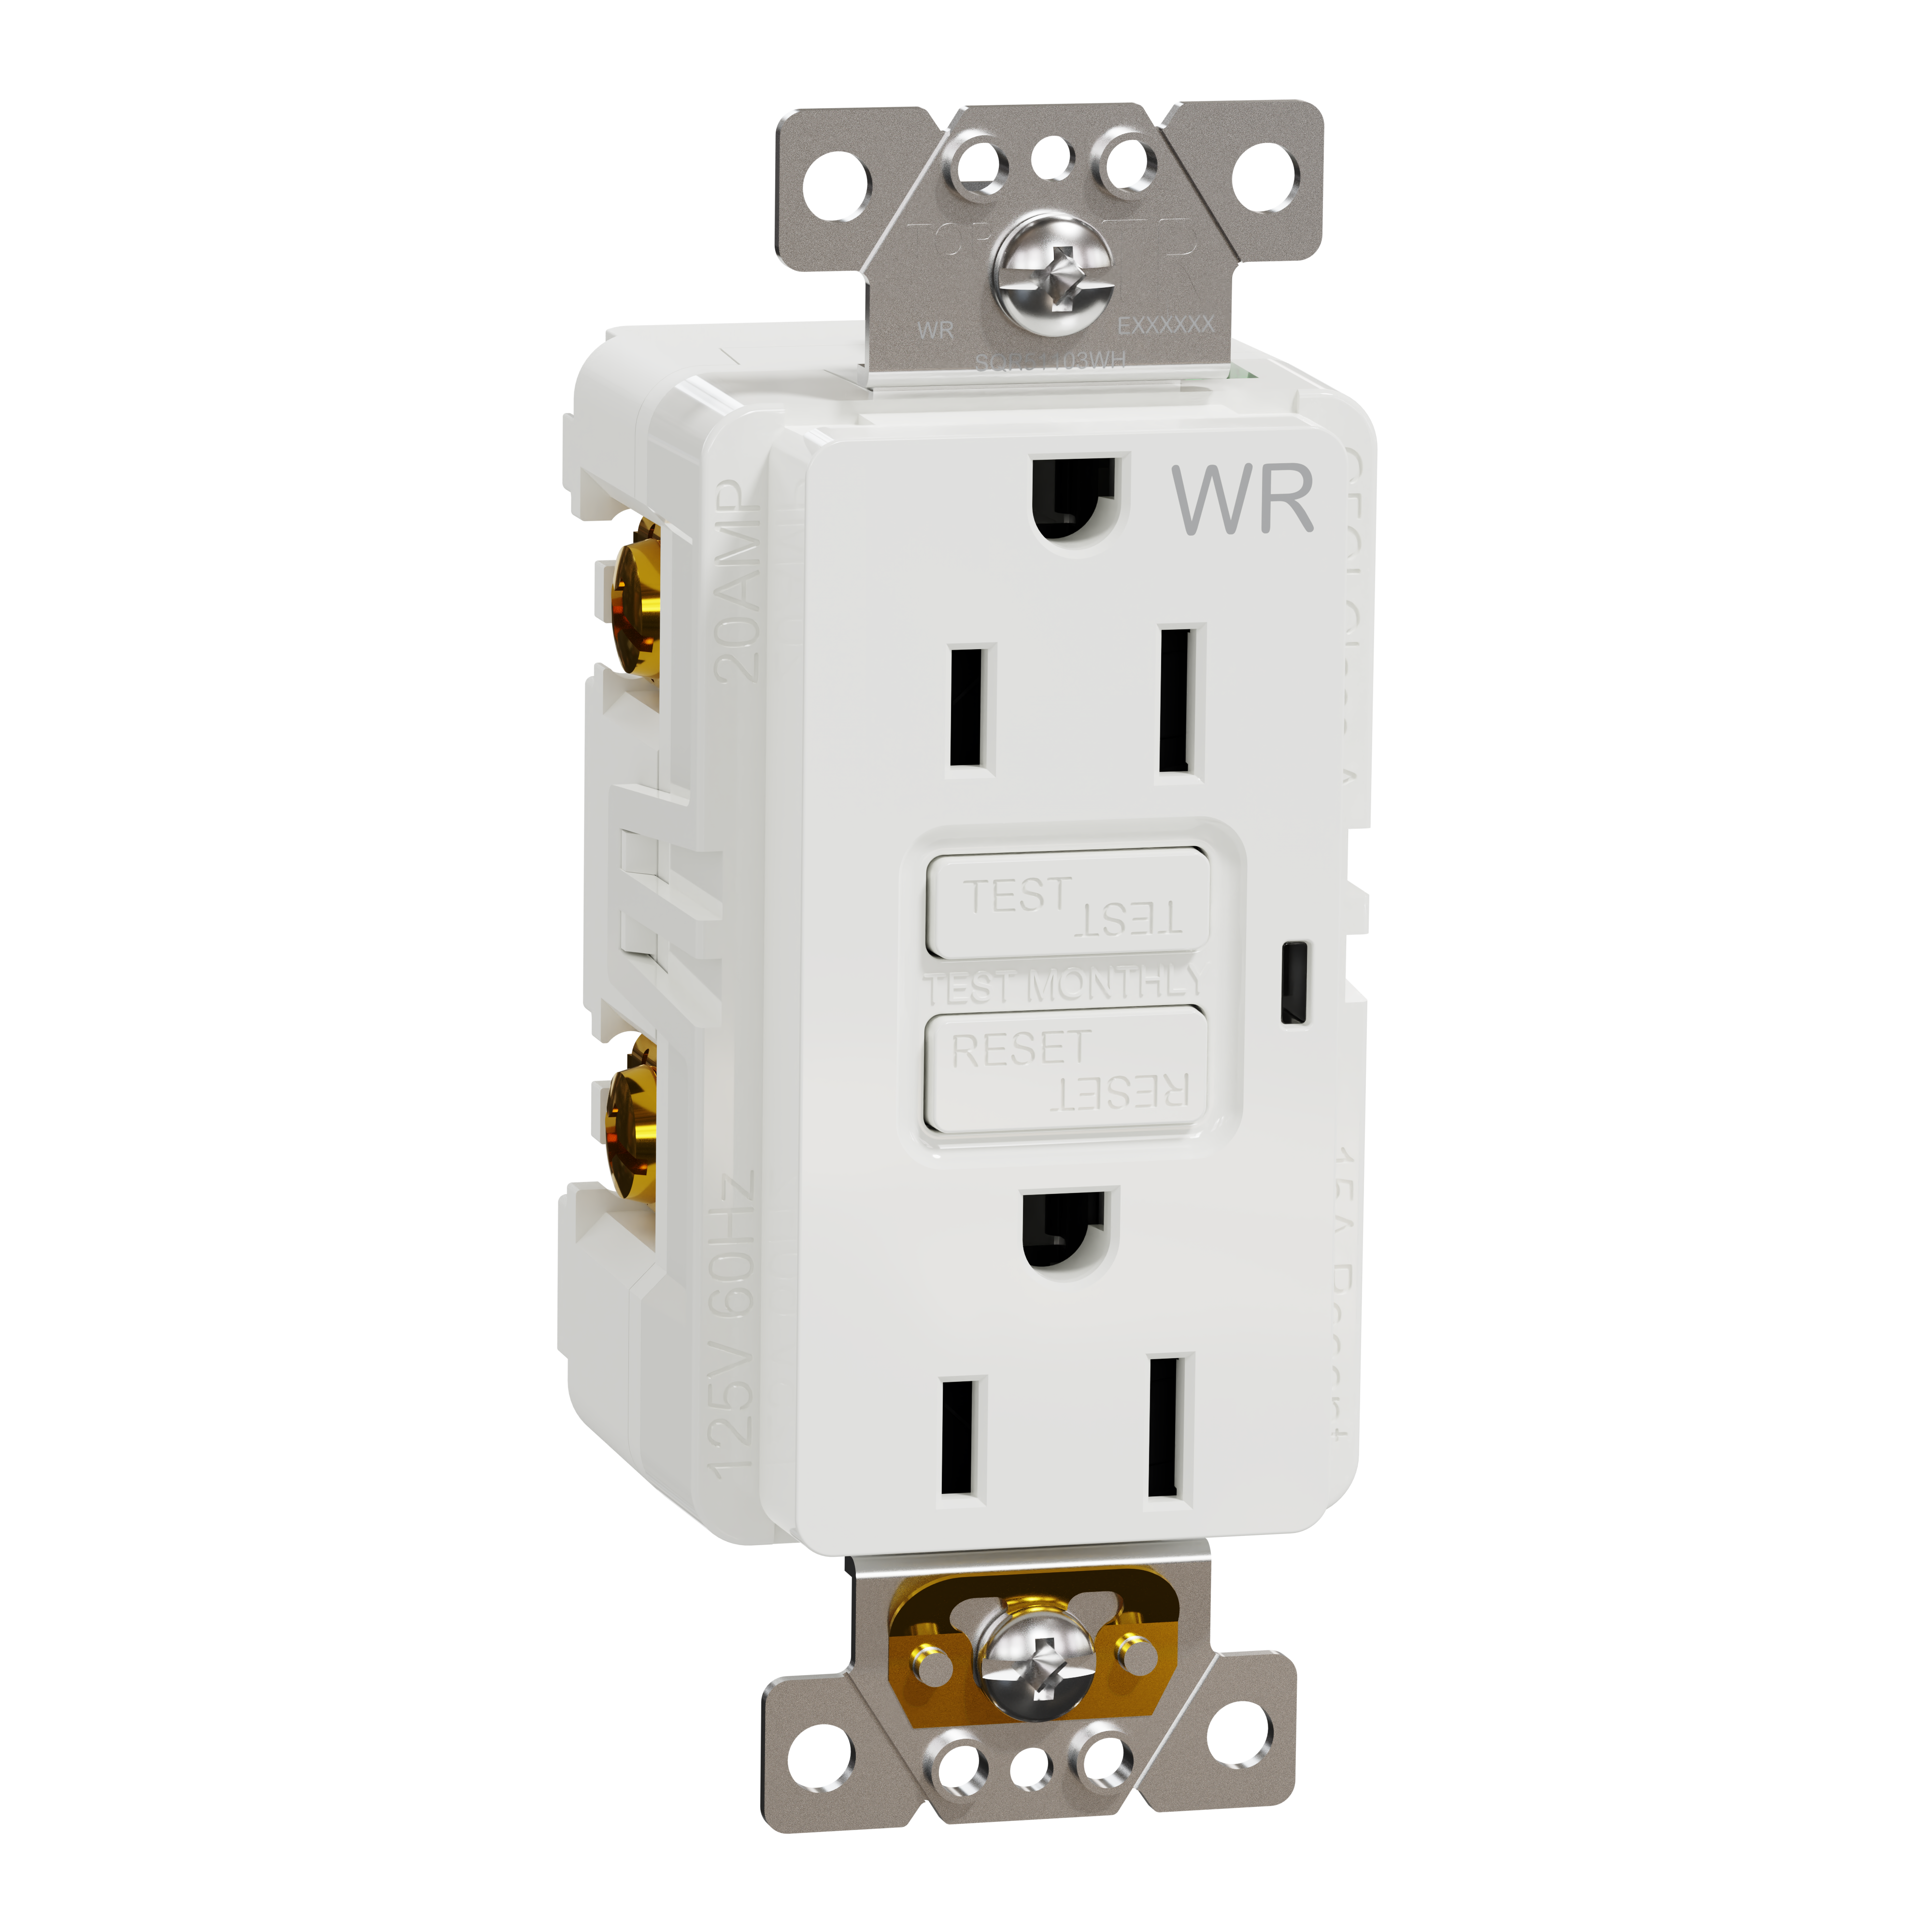 Socket-outlet, X Series, 15A, decorator, GFCI, tamper resistant, weatherproof, residential, white, matte finish